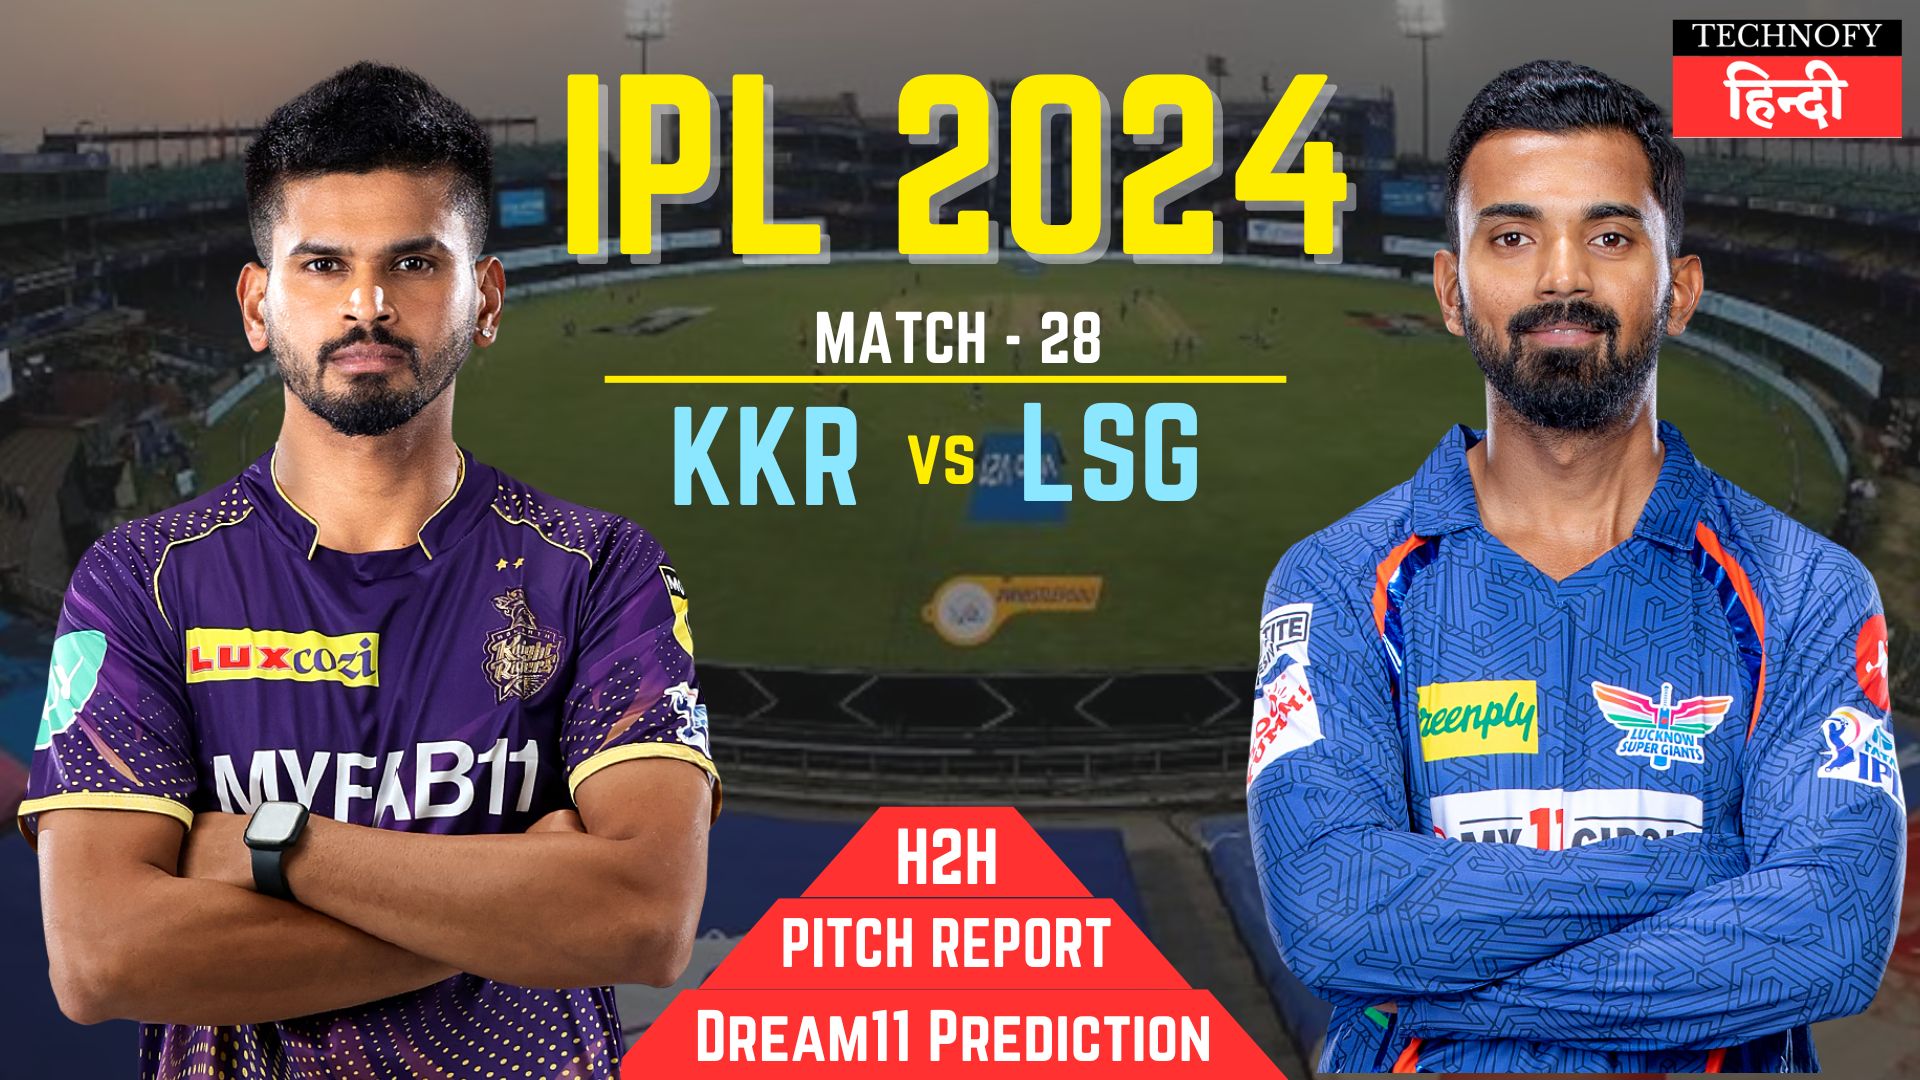 1. "Image: IPL 2020 live score - KKR vs LSU match. IND vs KKR live score and match updates. IND vs KKR live match. KKR vs LSG Dream11 Prediction." 2. "IPL 2020 live score: KKR vs LSU match. Stay updated with IND vs KKR live score and match updates. KKR vs LSG Dream11 Prediction." 3. "Catch the live score of IPL 2020: KKR vs LSU match. Get updates on IND vs KKR live score and match. KKR vs LSG Dream11 Prediction." 4. "Stay informed with IPL 2020 live score: KKR vs LSU match. Follow IND vs KKR live score and match updates. KKR vs LSG Dream11 Prediction." 5. "IPL 2020 live score: KKR vs LSU match. Stay tuned for IND vs KKR live score and match updates. KKR vs LSG Dream11 Prediction." KKR vs LSG Dream11 Prediction, Playing11 or Pitch Report